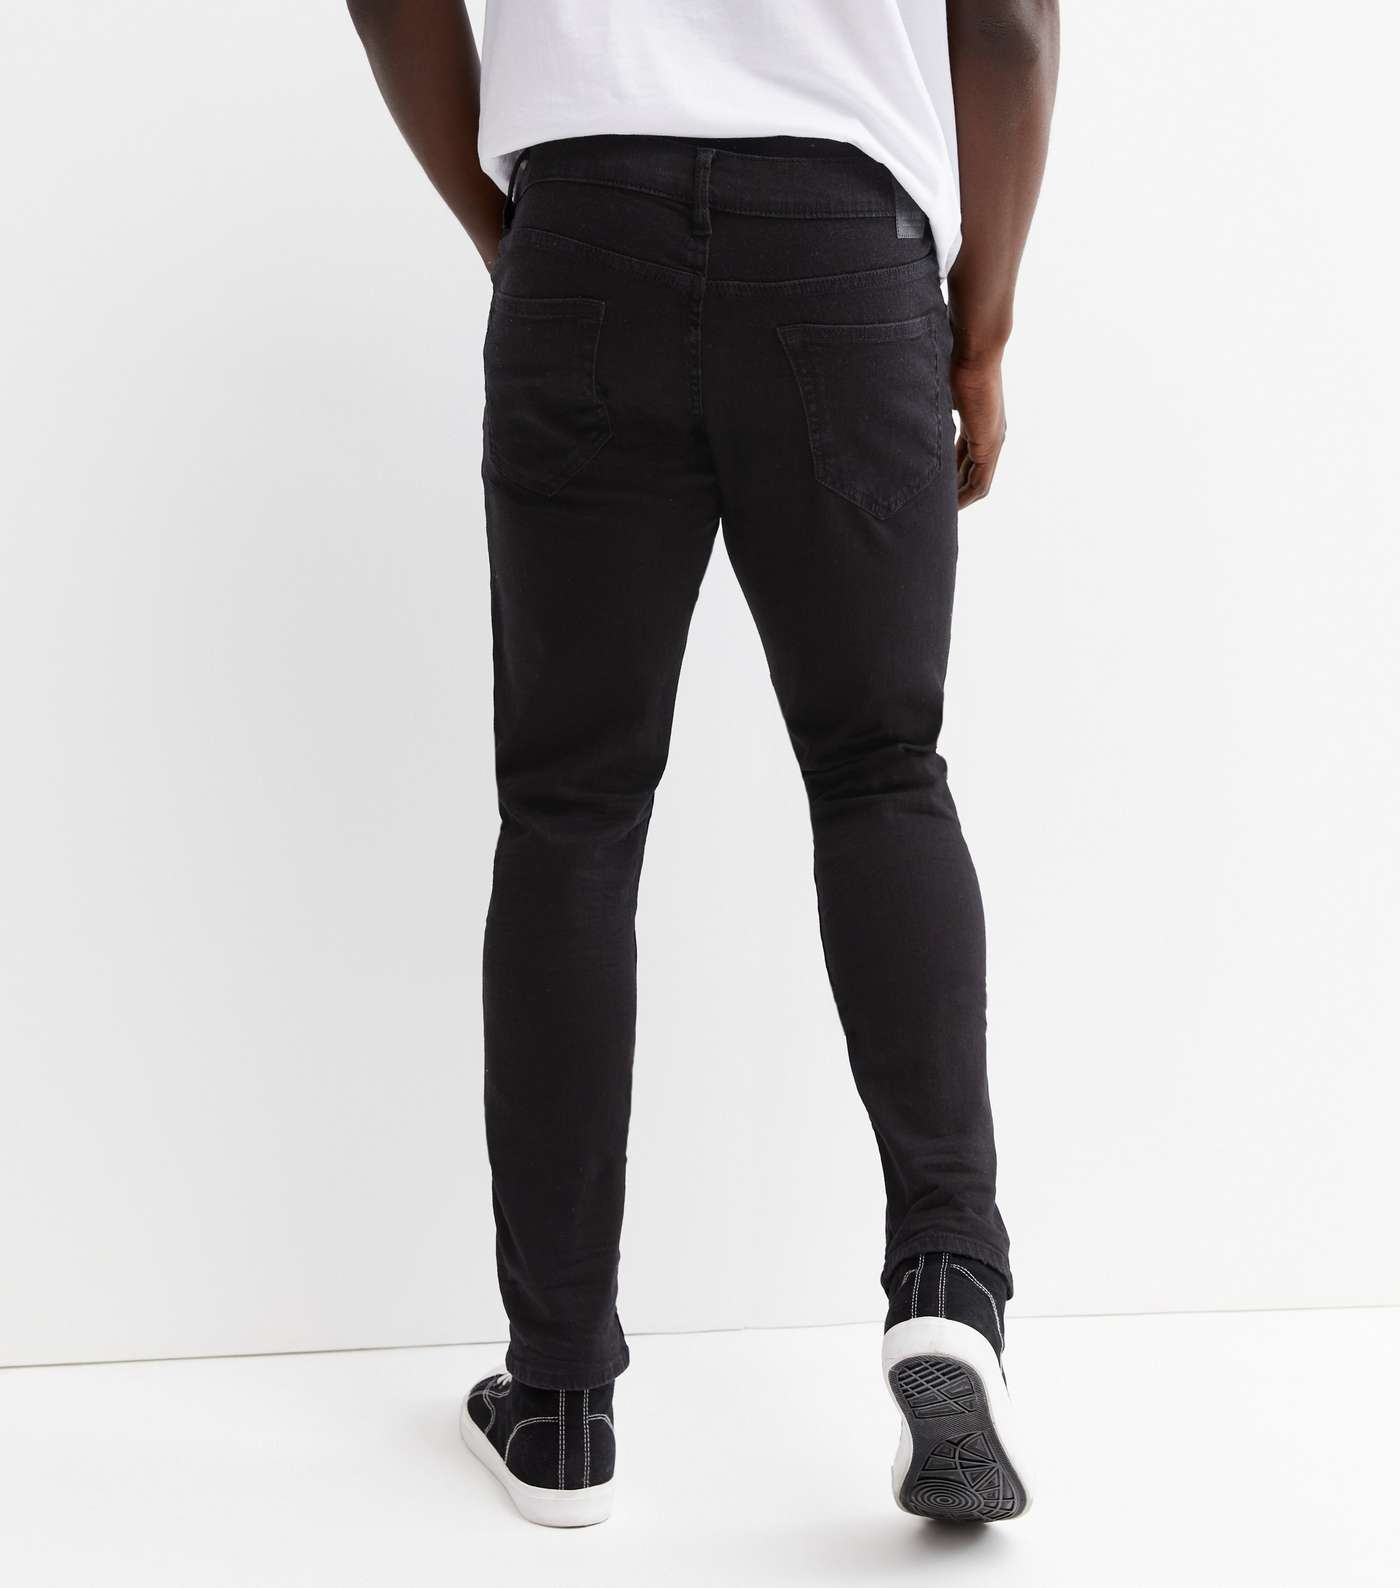 Only & Sons Black Slim Fit Jeans Image 4